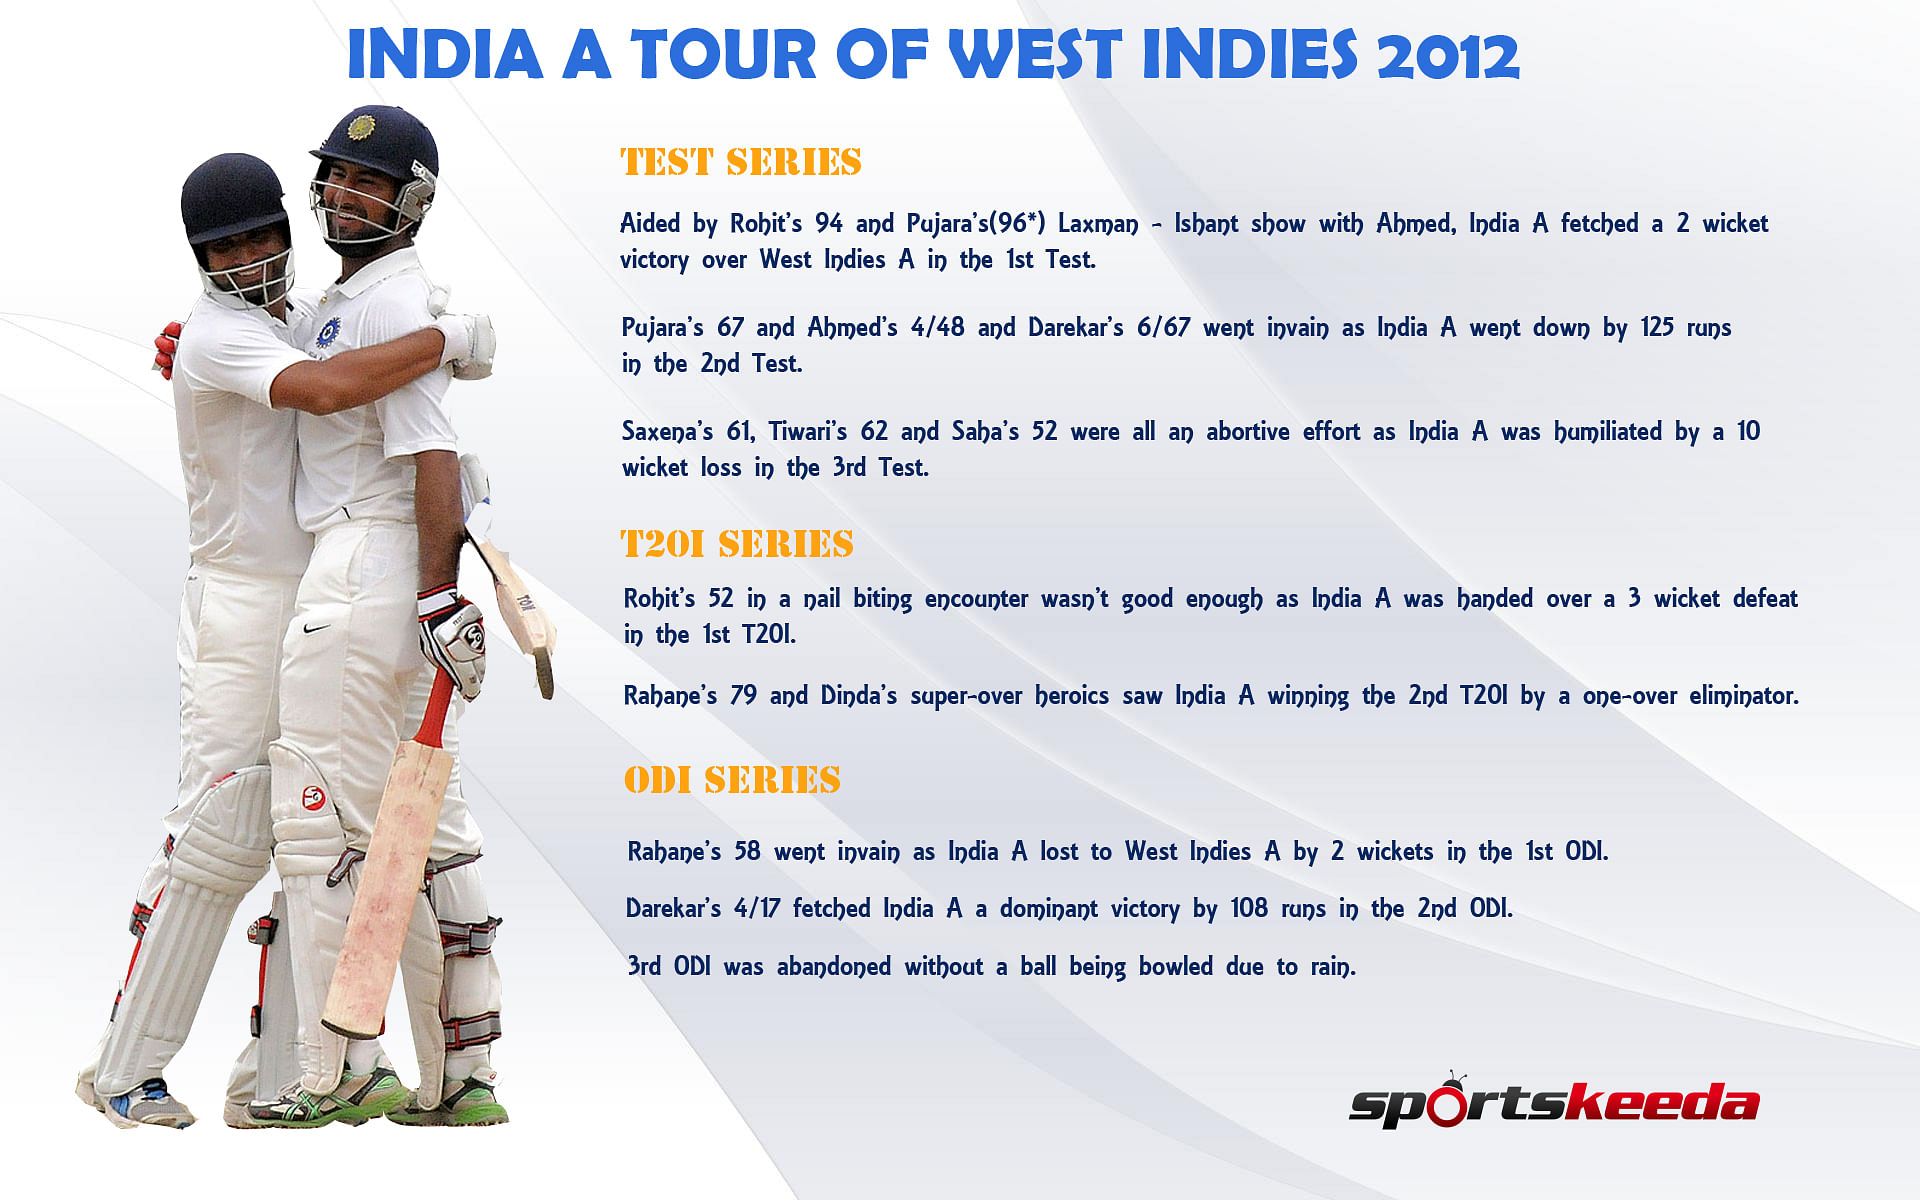 India A tour of West Indies - An Analysis